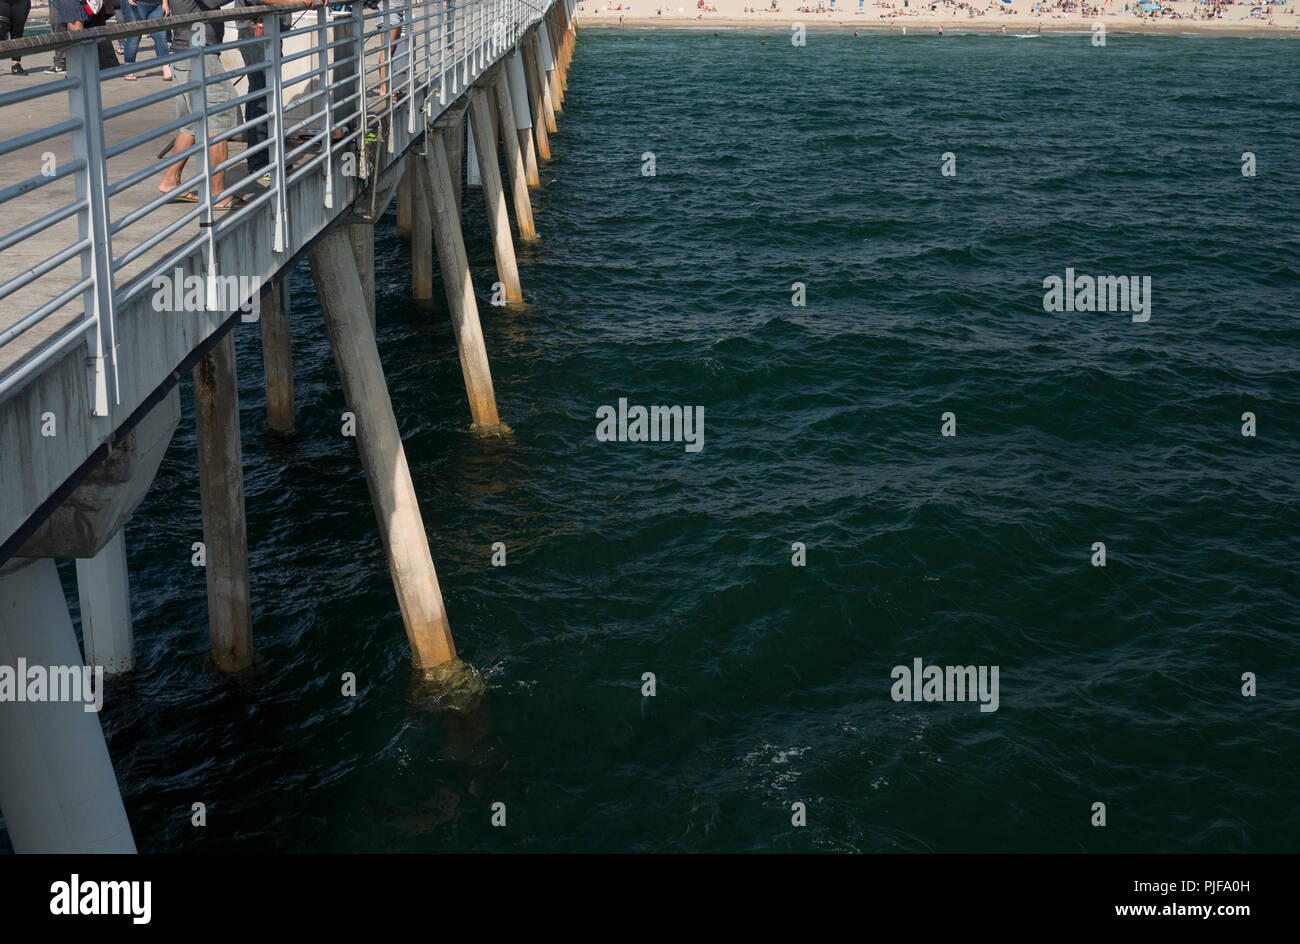 View of concrete pillars support a pier with view of the ocean Stock Photo